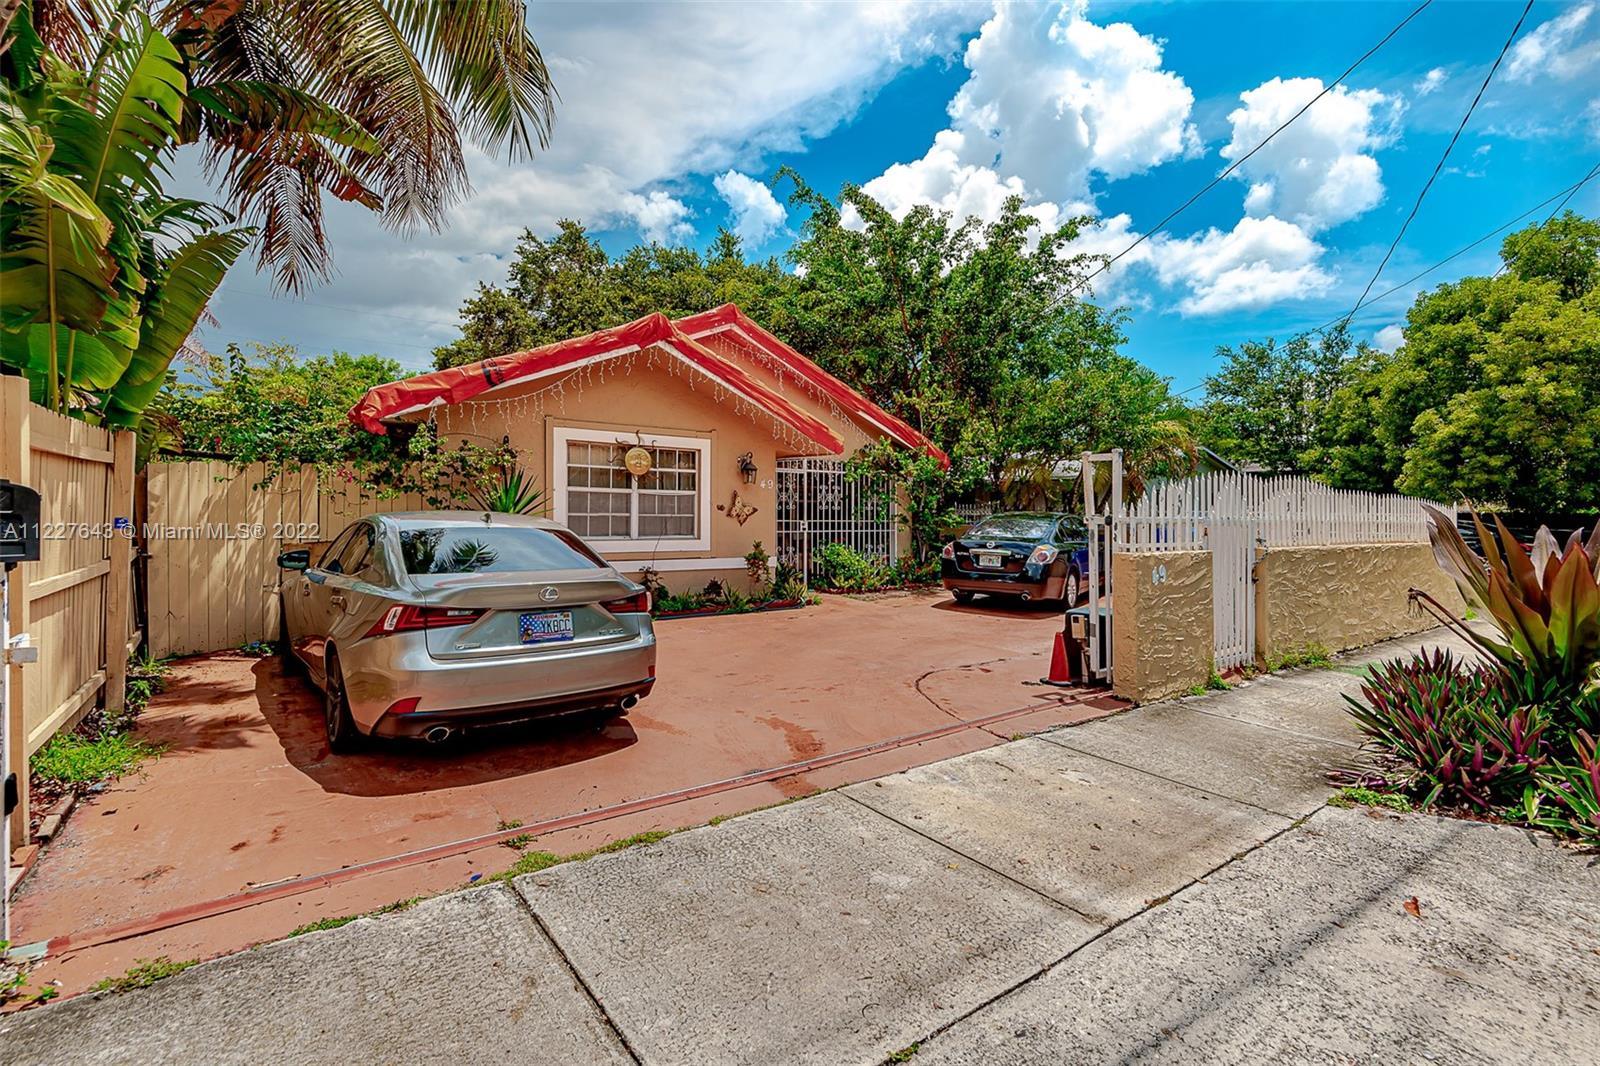 Photo of 49 NW 35th St in Miami, FL